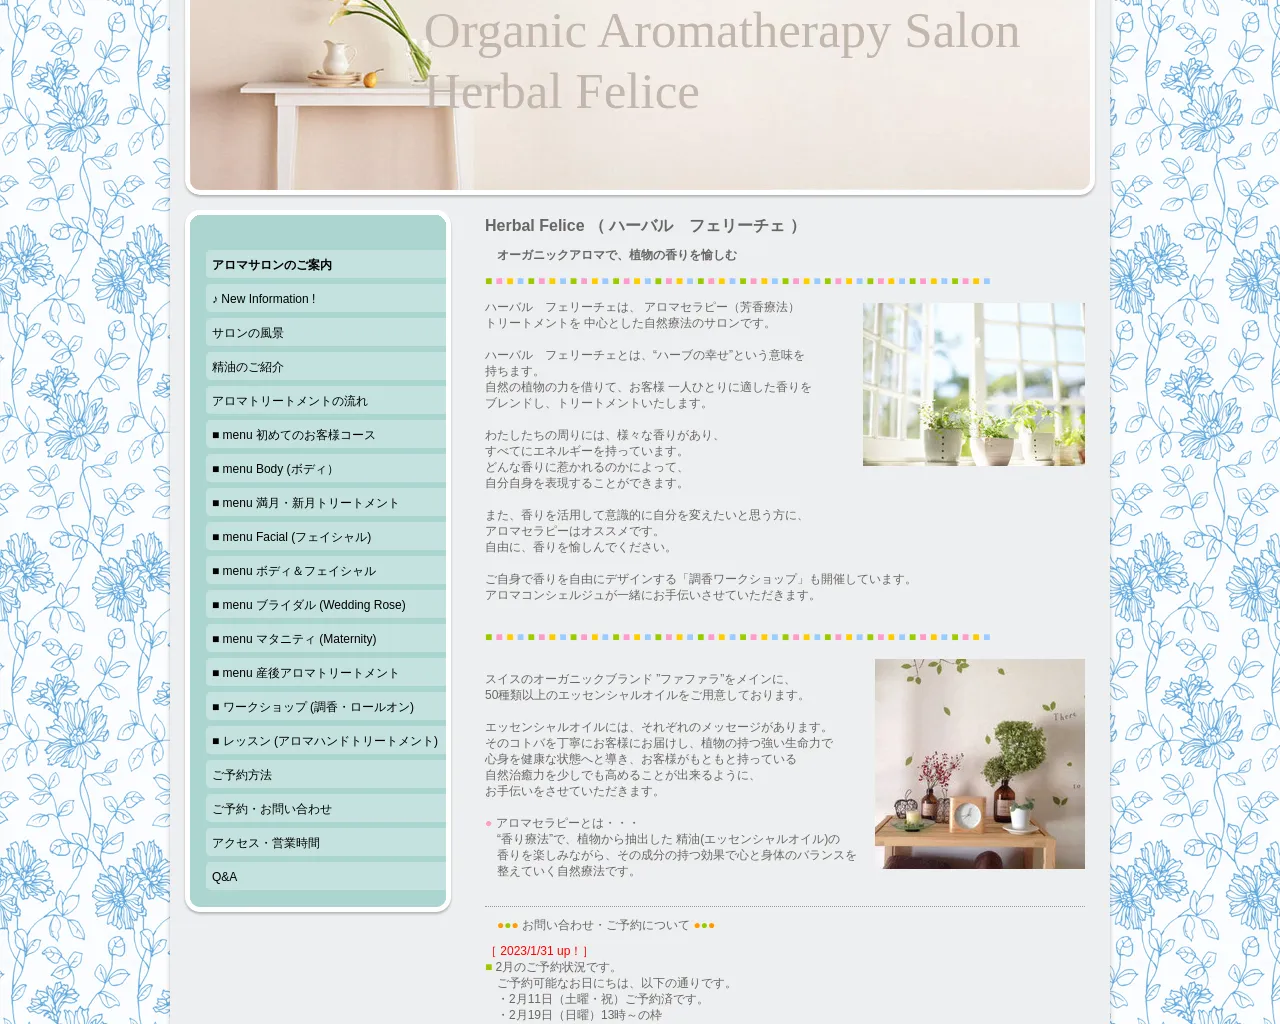 Herbal Felice (ハーバル フェリーチェ) site